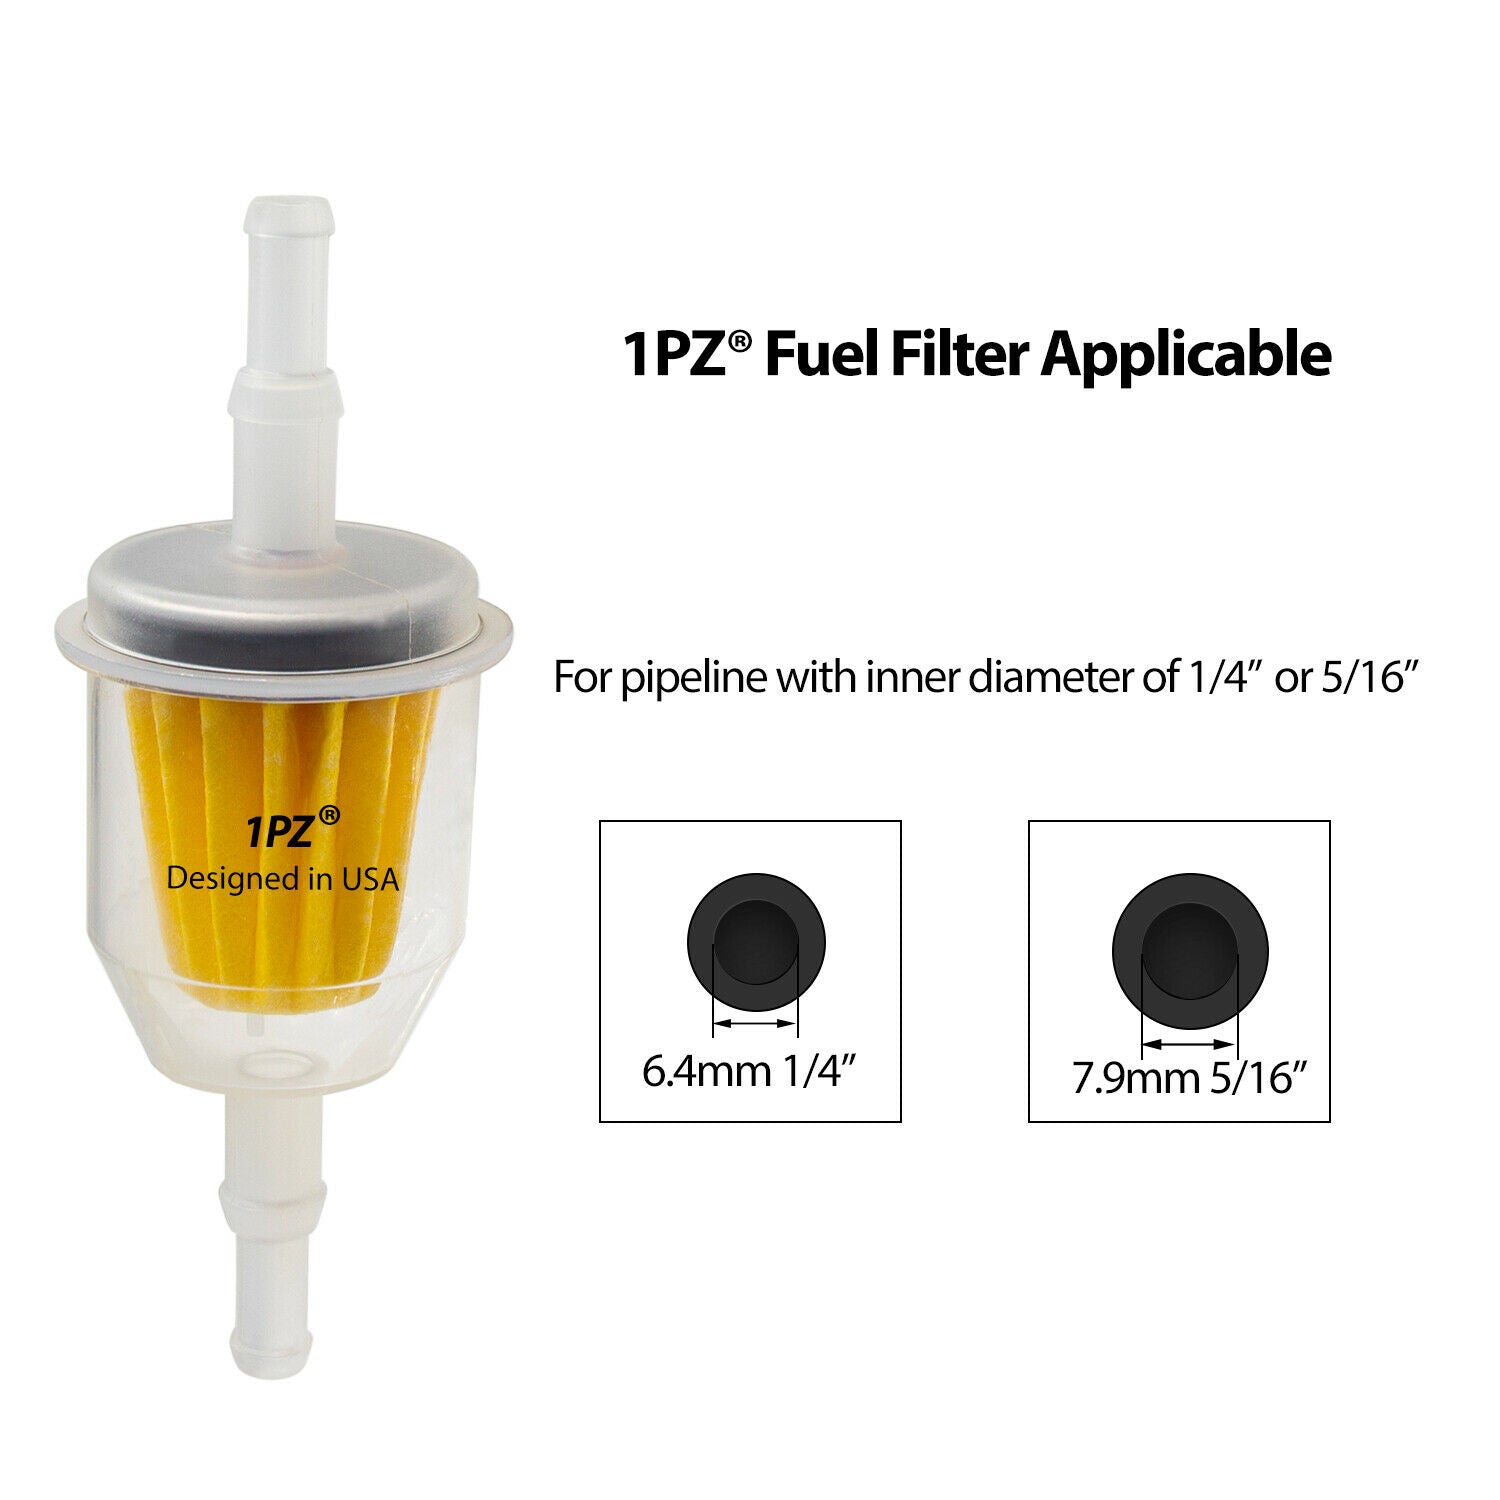 1PZ Premium 1/4" and 5/16" inch Universal Fuel Filter Barbed Clear Replacement for Honda Kohler John Deere Toro (Pack of 10)